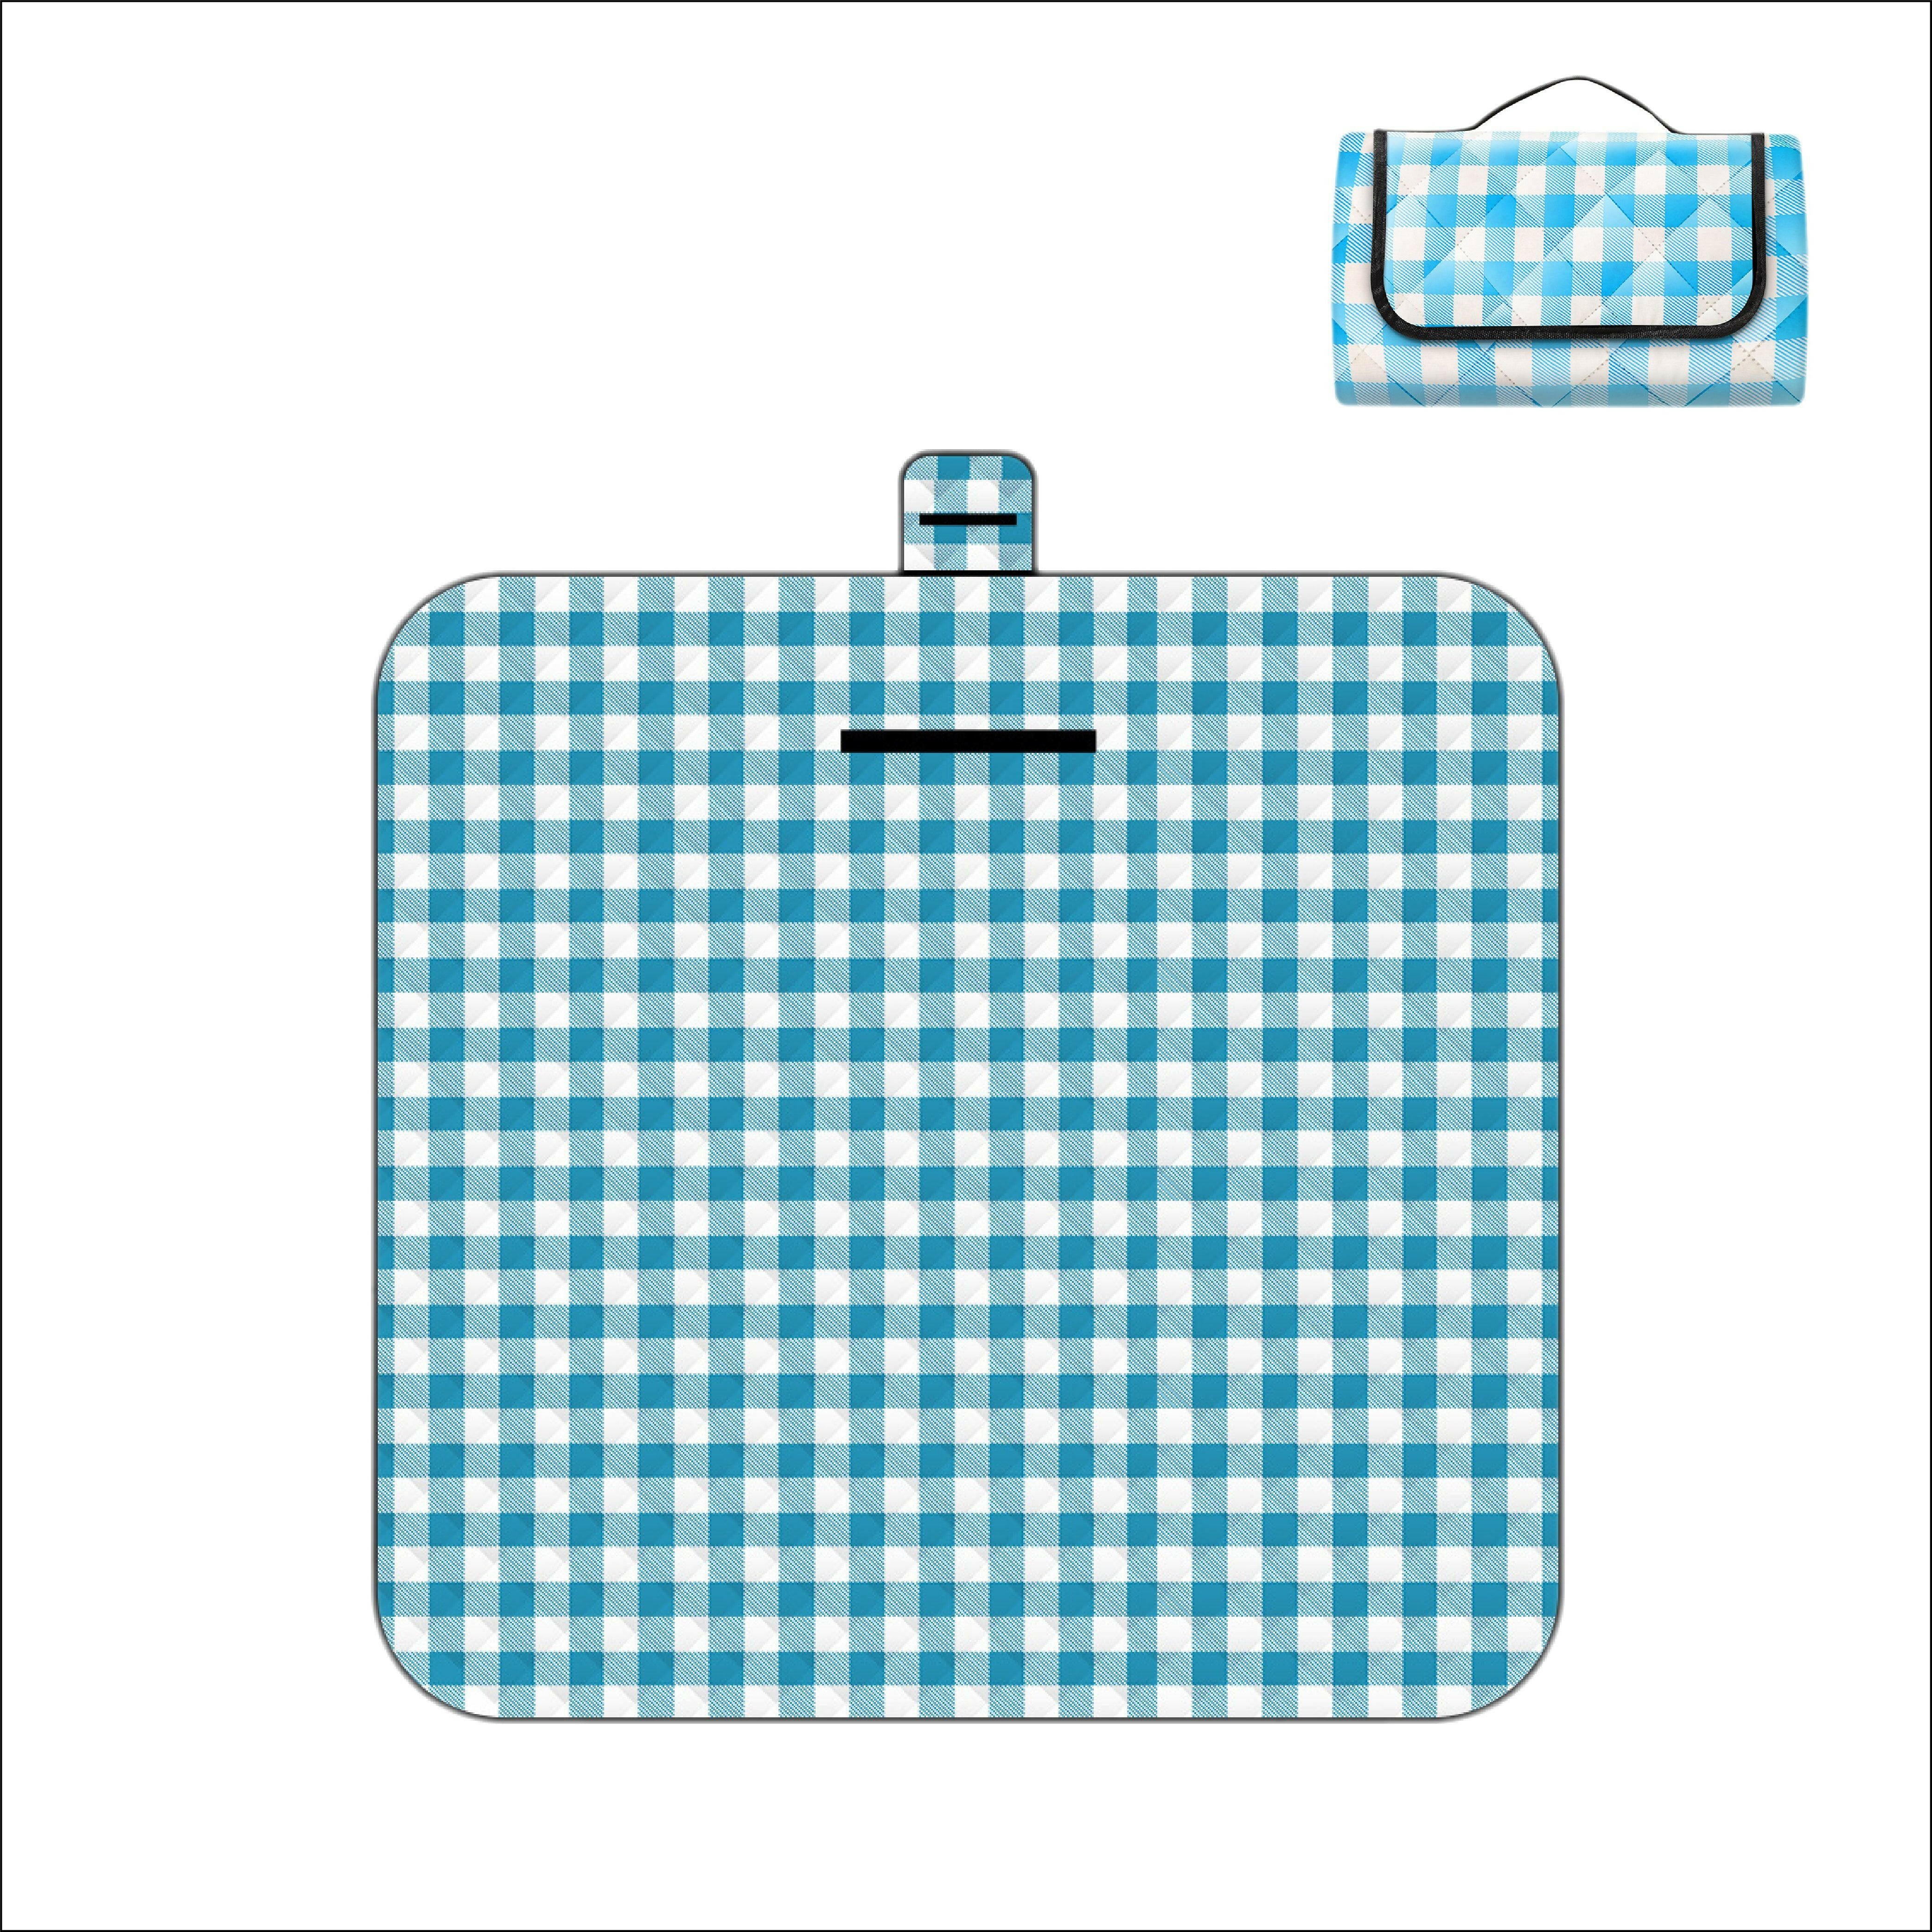 Outdoor Bees Foldable Waterproof Picnic Blanket Blue Grid | Outdoor Life | Brilliant Home Living